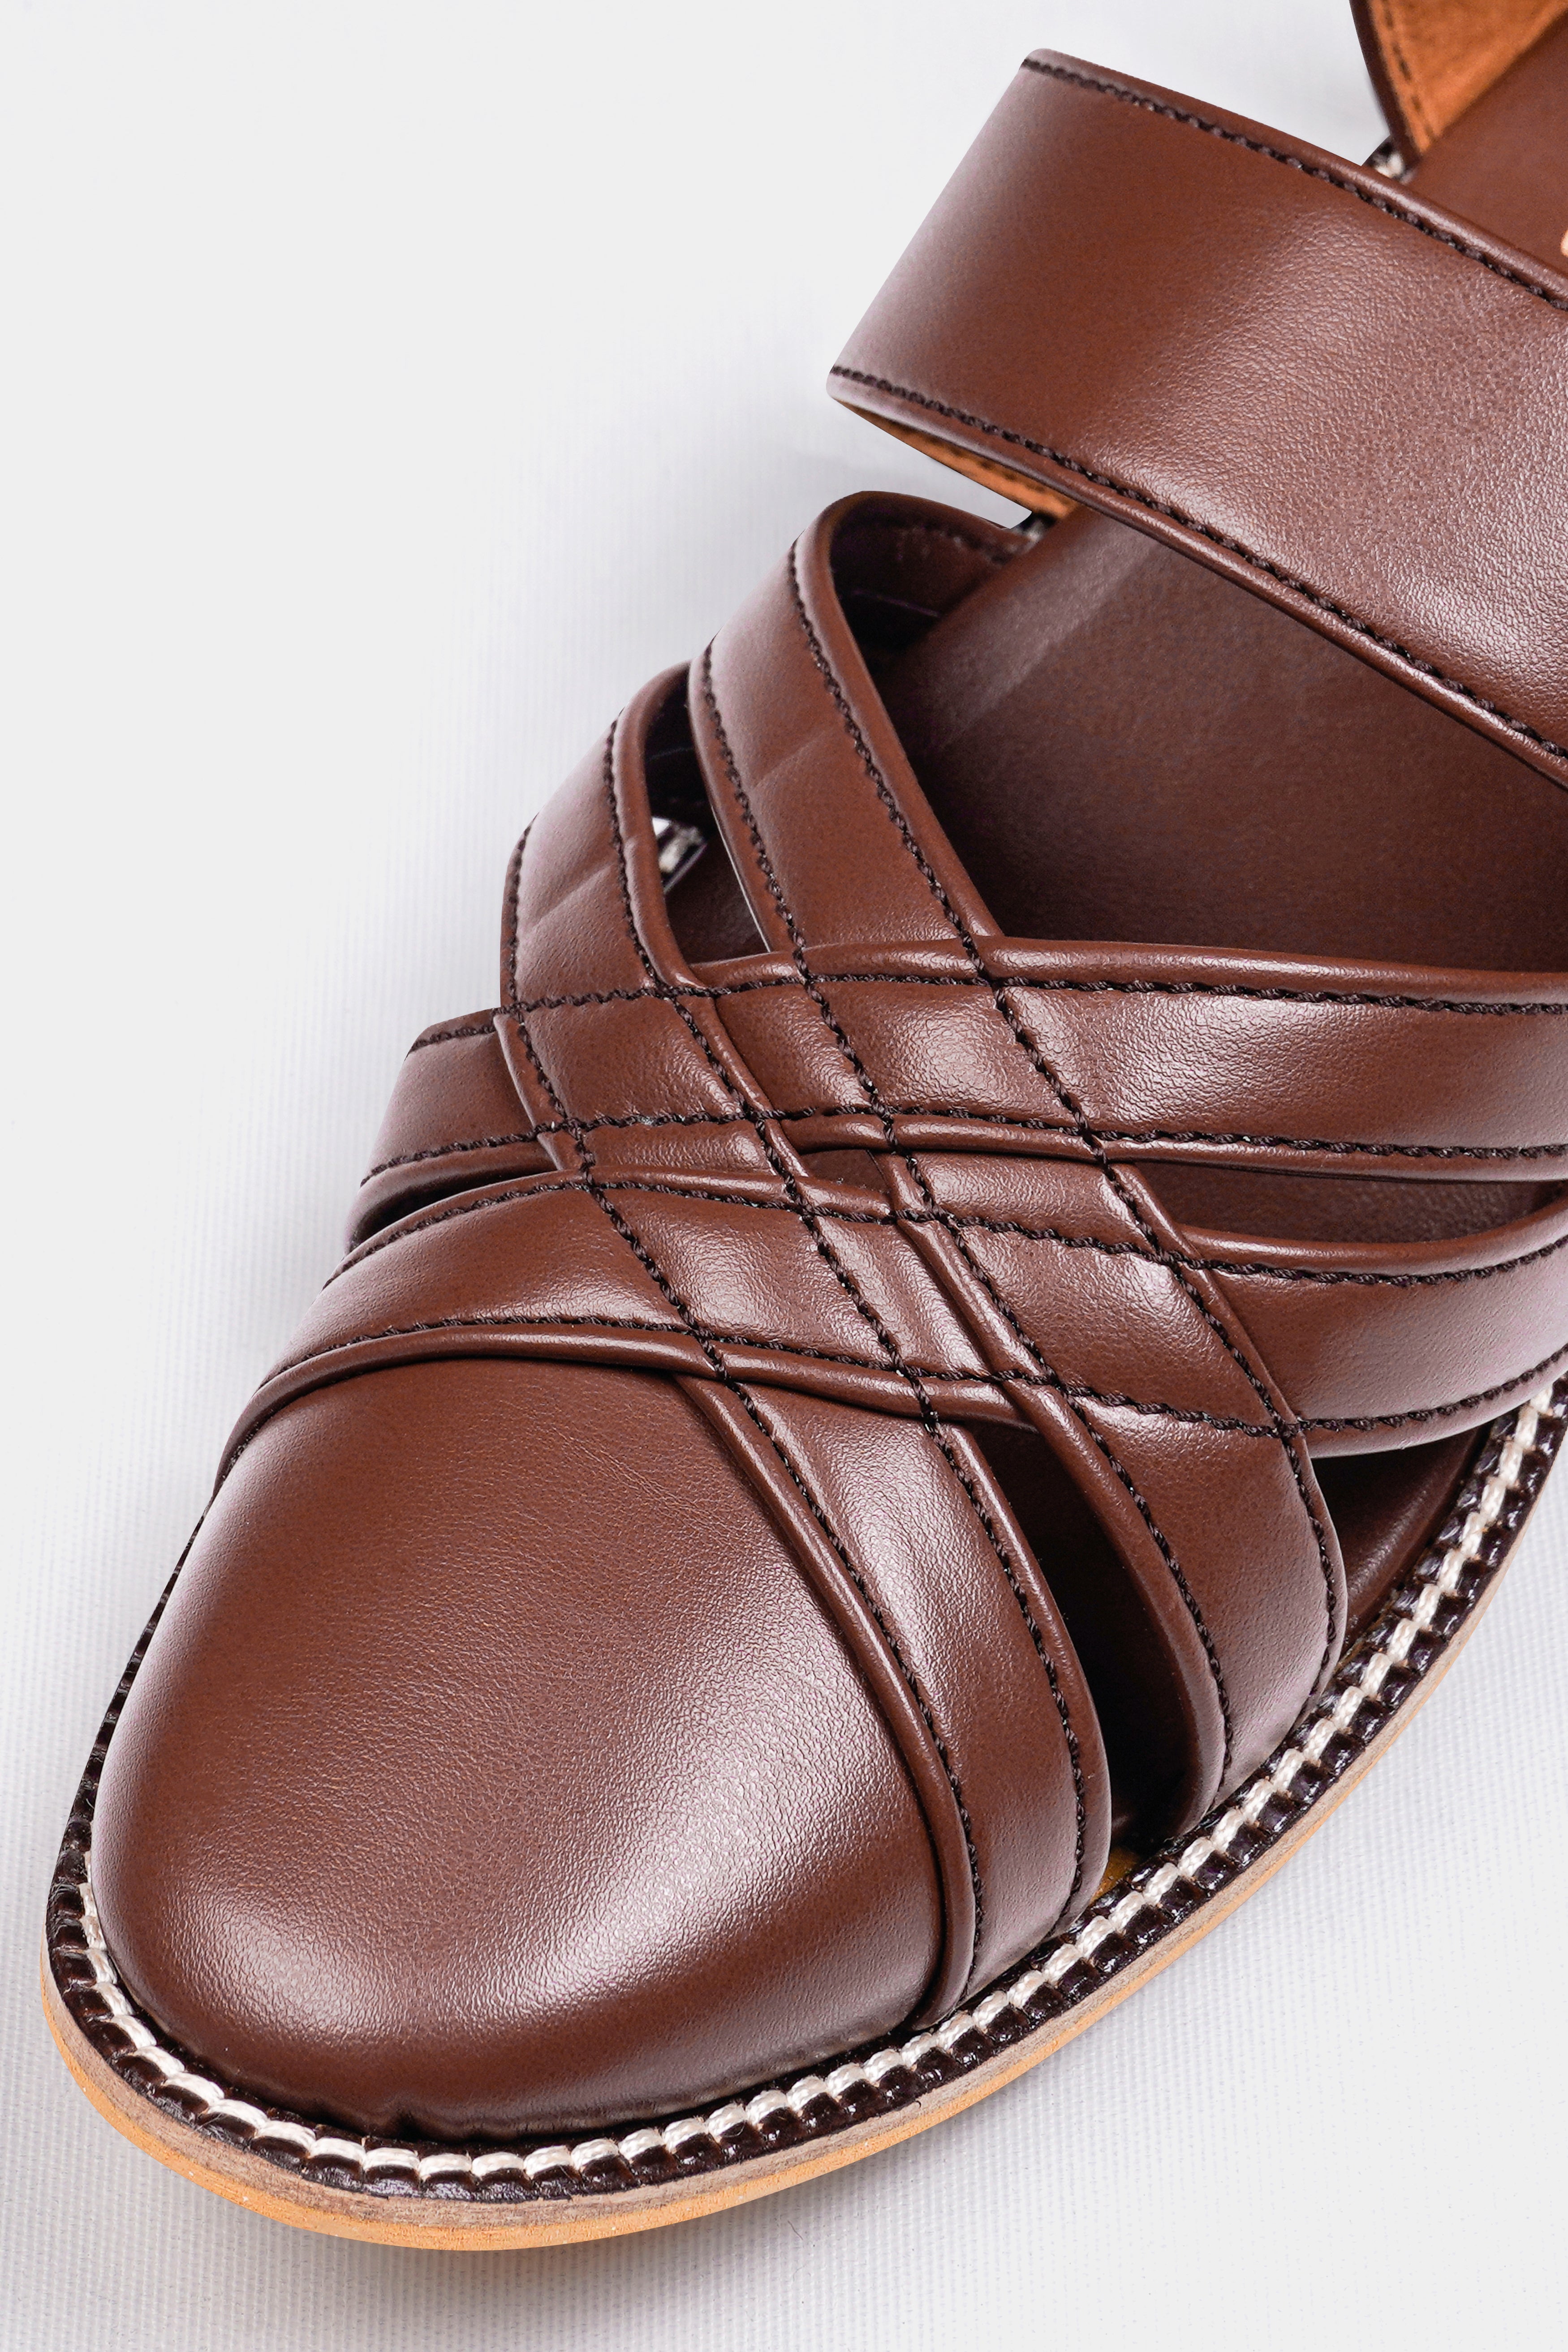 Brown Criss Cross Vegan Leather Hand Stitched Pathanis Sandal FT126-6, FT126-7, FT126-8, FT126-9, FT126-10, FT126-11